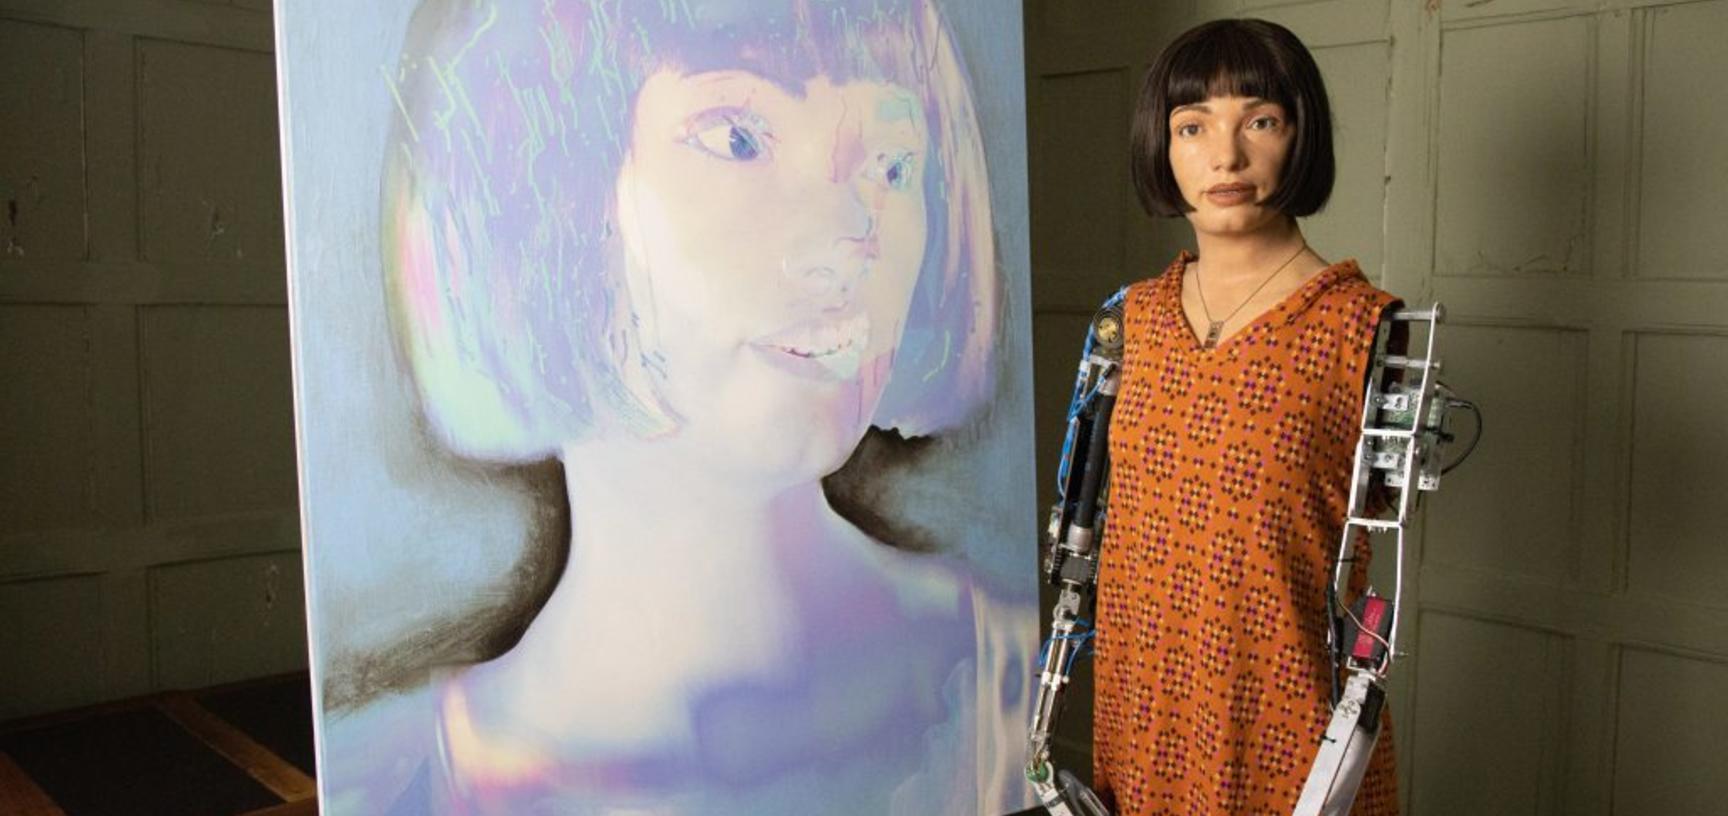 The AI-Da robot "artist" pictured in front of a self-portrait created by the AI